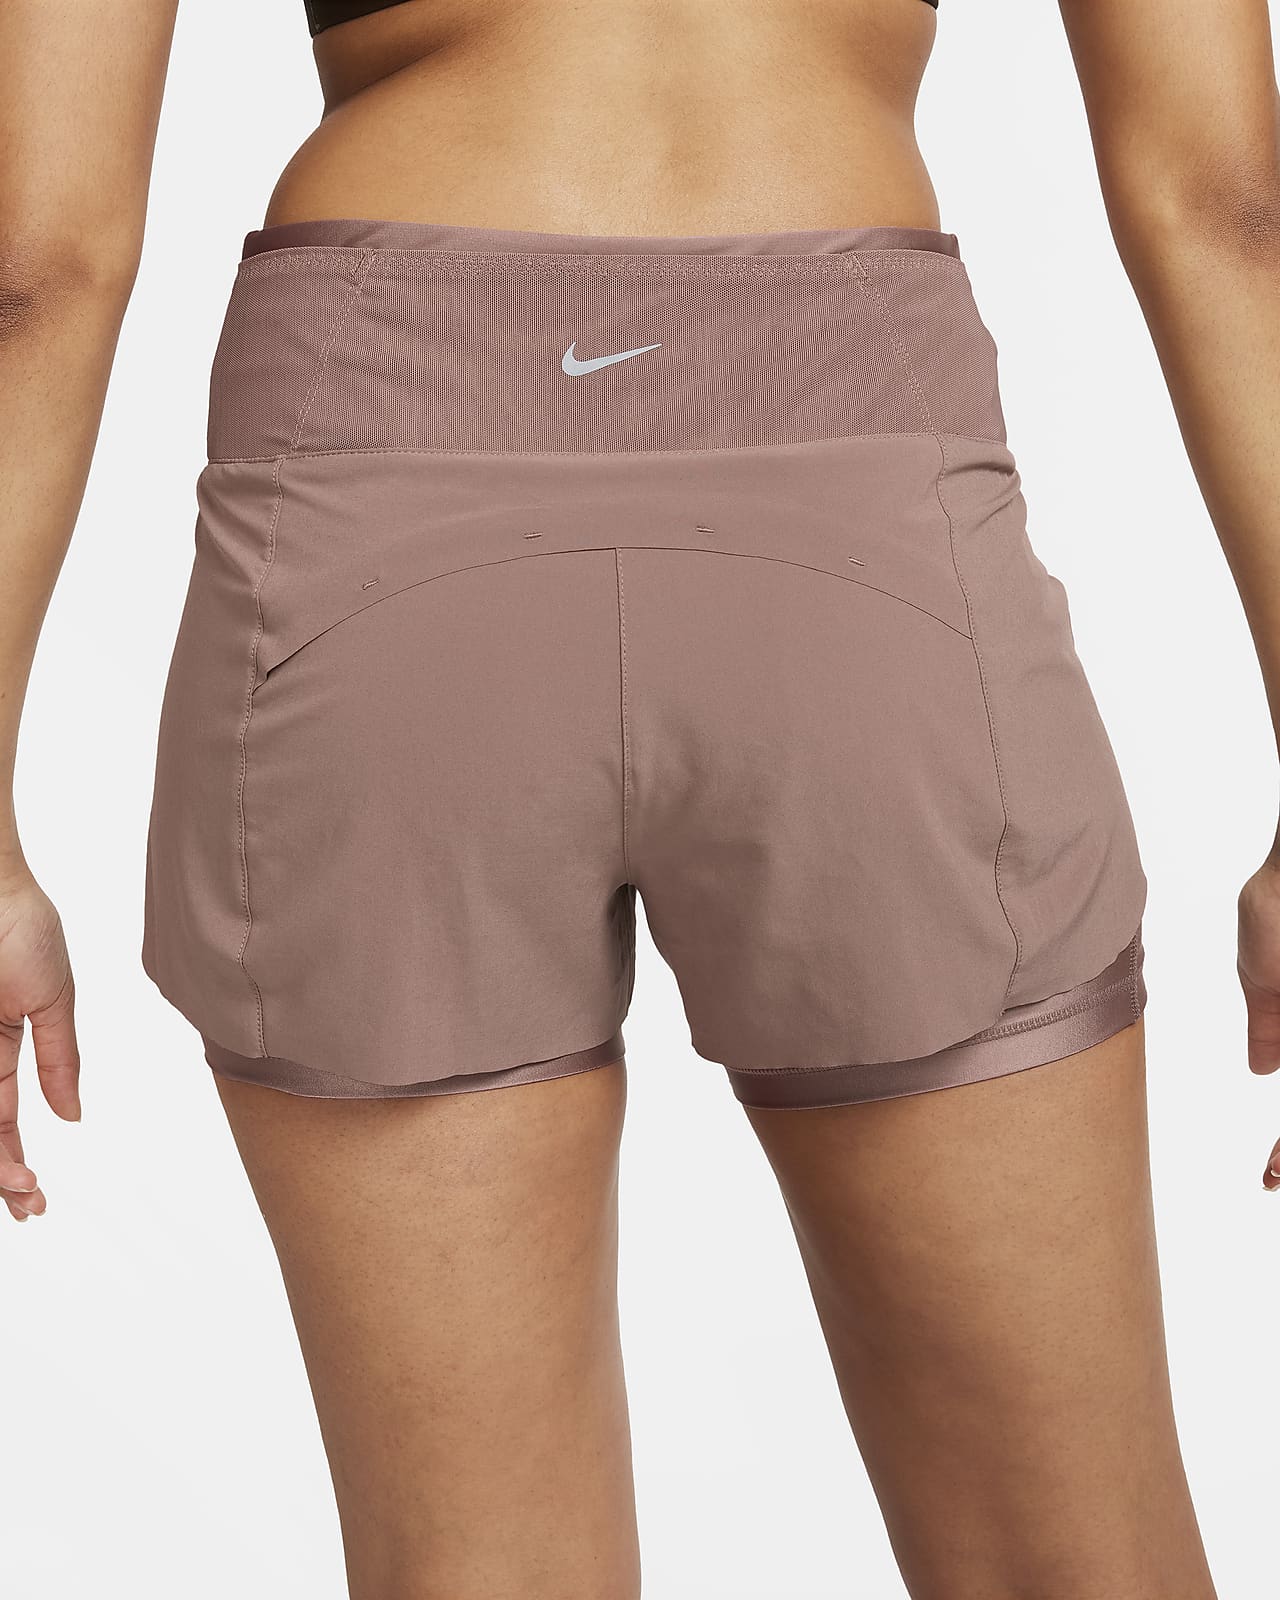 NEW Nike One Plus Size Women's 7 Dual Pockets Workout Running Shorts Size  1X